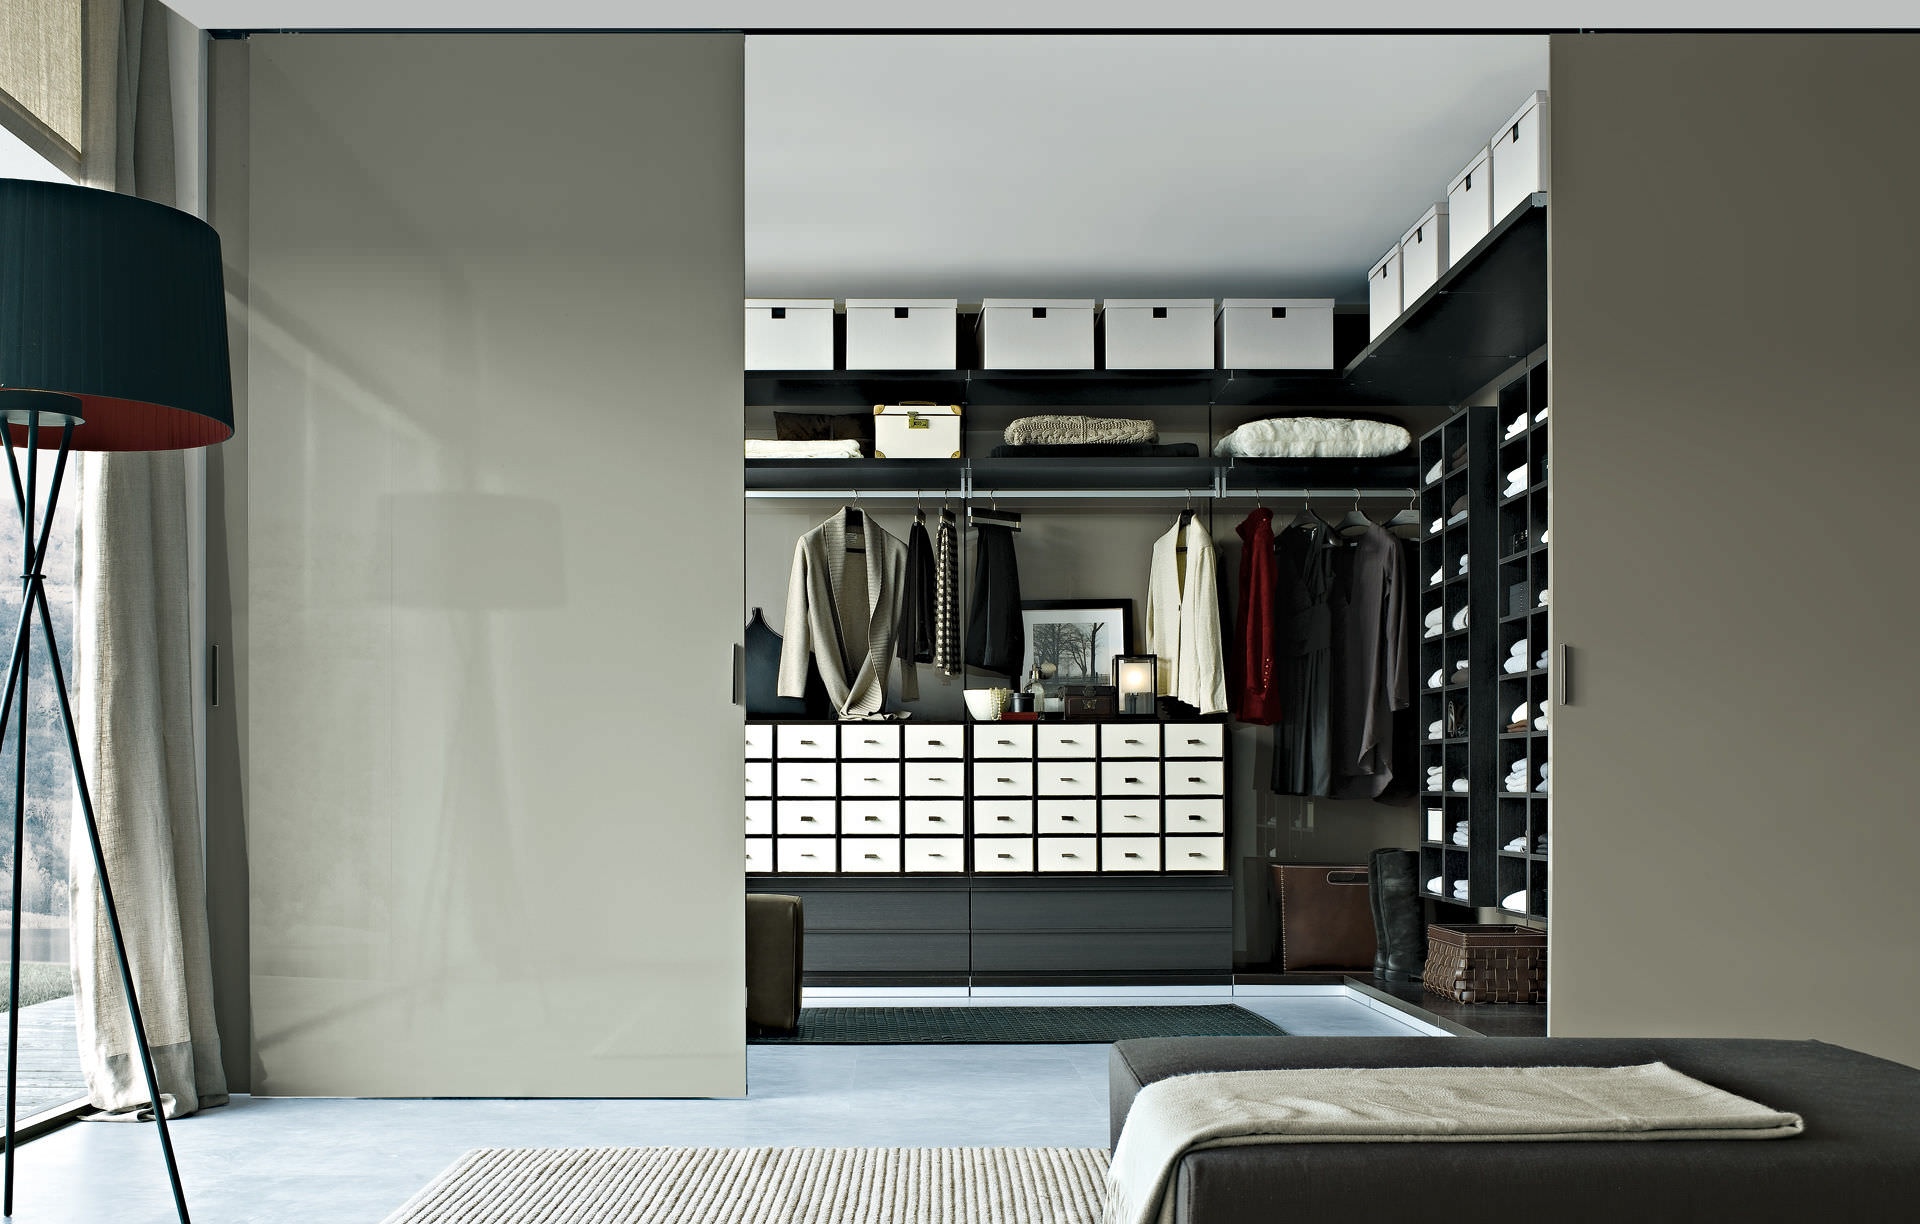 Modern Black In Amazing Modern Black White Walk In Closet Ideas With Sleek Sliding Doors Completed With Clothes Rack And Cabinet Furnished With Flooring Stand Lamp Closet Walk In Closet Ideas: Enjoying Private Collection